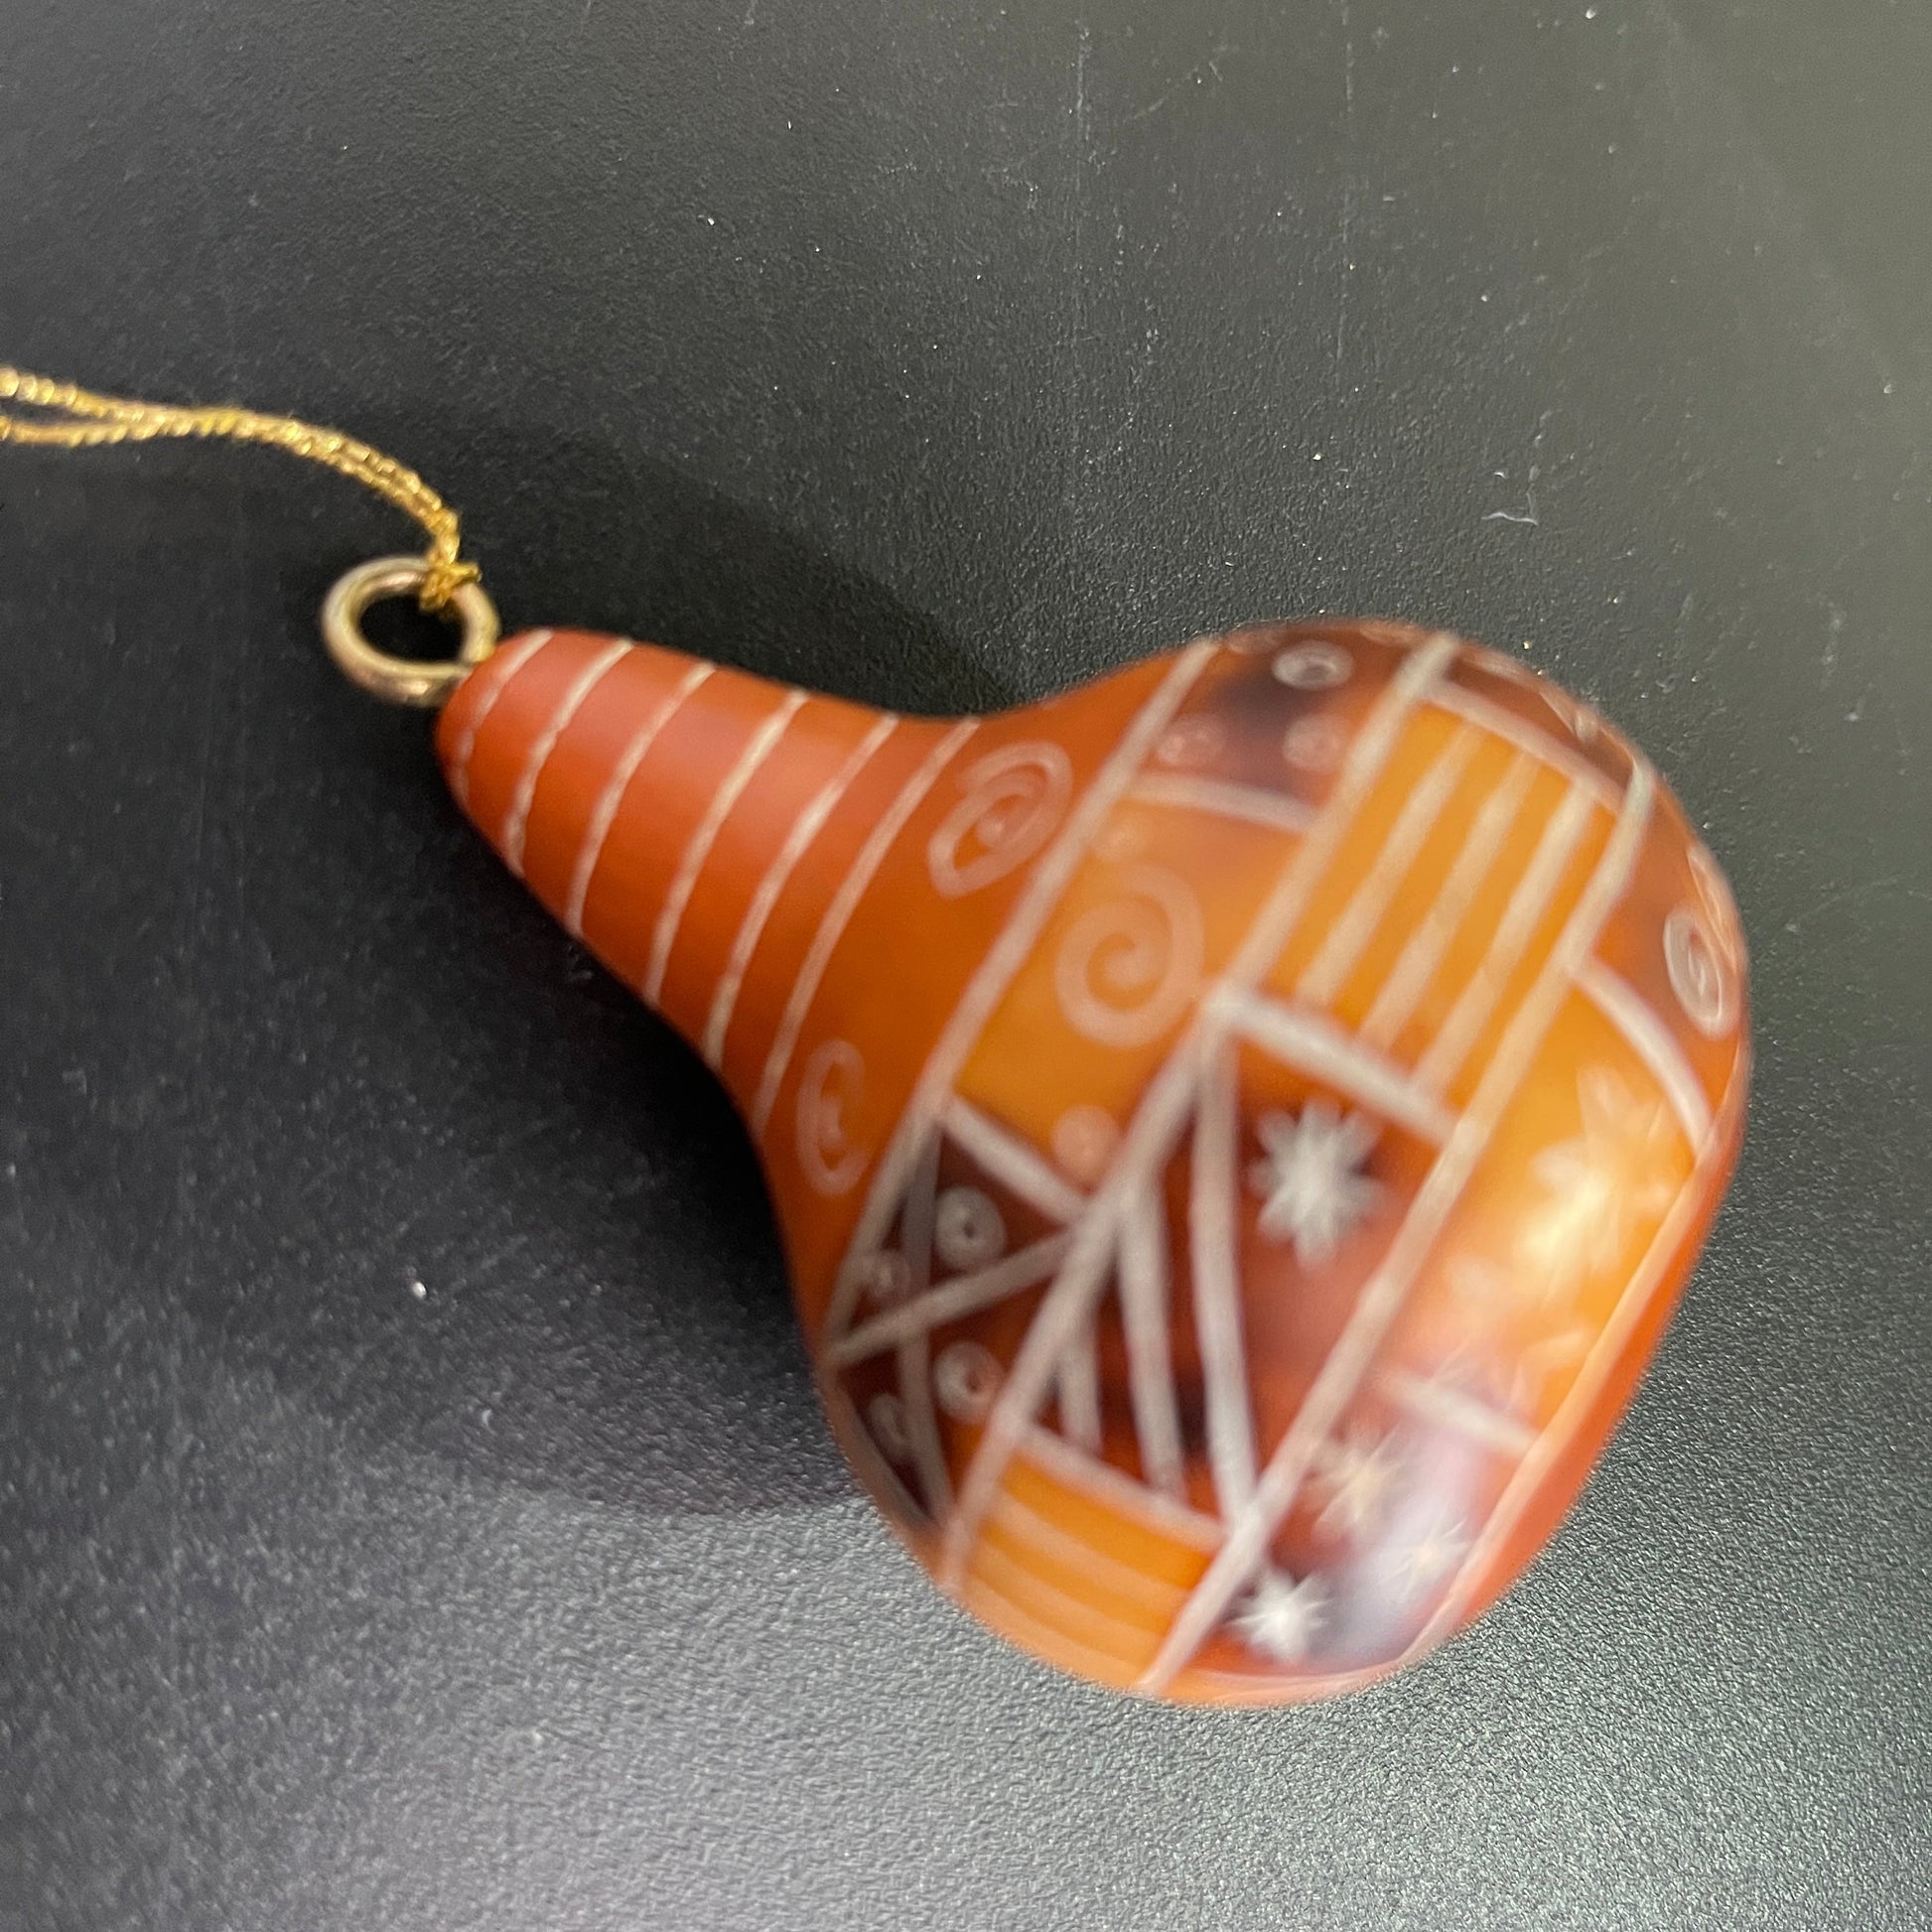 Indigenous Peoples style carved gourd Christmas ornament